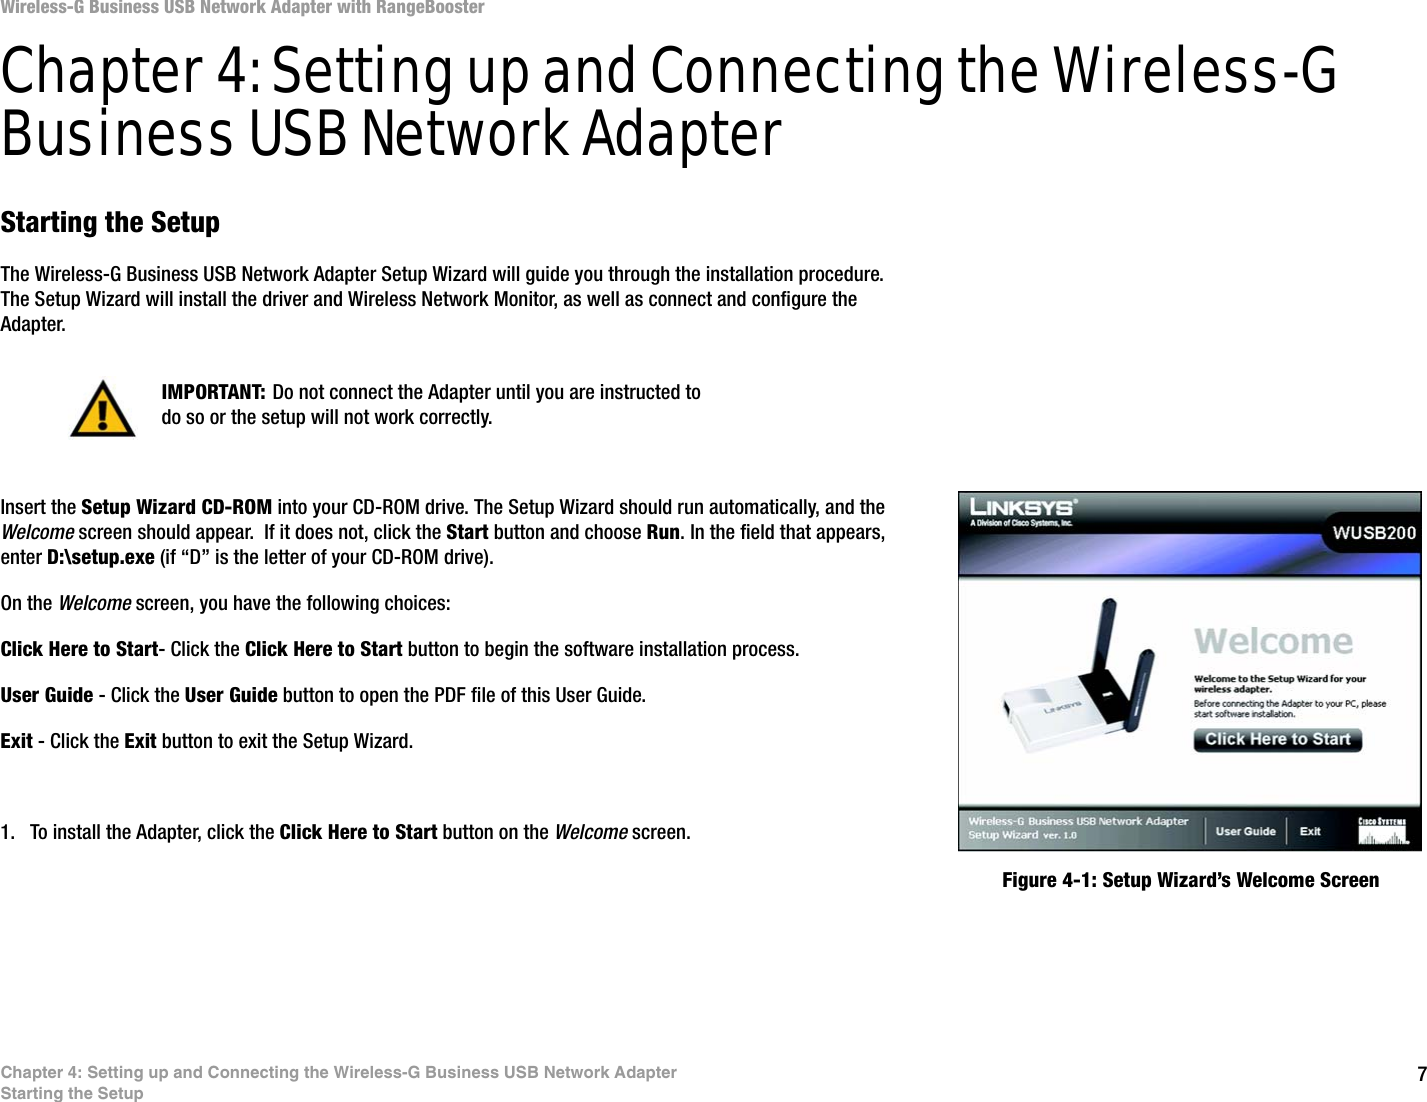 7Chapter 4: Setting up and Connecting the Wireless-G Business USB Network AdapterStarting the SetupWireless-G Business USB Network Adapter with RangeBoosterChapter 4: Setting up and Connecting the Wireless-G Business USB Network AdapterStarting the SetupThe Wireless-G Business USB Network Adapter Setup Wizard will guide you through the installation procedure. The Setup Wizard will install the driver and Wireless Network Monitor, as well as connect and configure the Adapter.Insert the Setup Wizard CD-ROM into your CD-ROM drive. The Setup Wizard should run automatically, and the Welcome screen should appear.  If it does not, click the Start button and choose Run. In the field that appears, enter D:\setup.exe (if “D” is the letter of your CD-ROM drive). On the Welcome screen, you have the following choices:Click Here to Start- Click the Click Here to Start button to begin the software installation process. User Guide - Click the User Guide button to open the PDF file of this User Guide. Exit - Click the Exit button to exit the Setup Wizard.1. To install the Adapter, click the Click Here to Start button on the Welcome screen.Figure 4-1: Setup Wizard’s Welcome ScreenIMPORTANT: Do not connect the Adapter until you are instructed to do so or the setup will not work correctly.